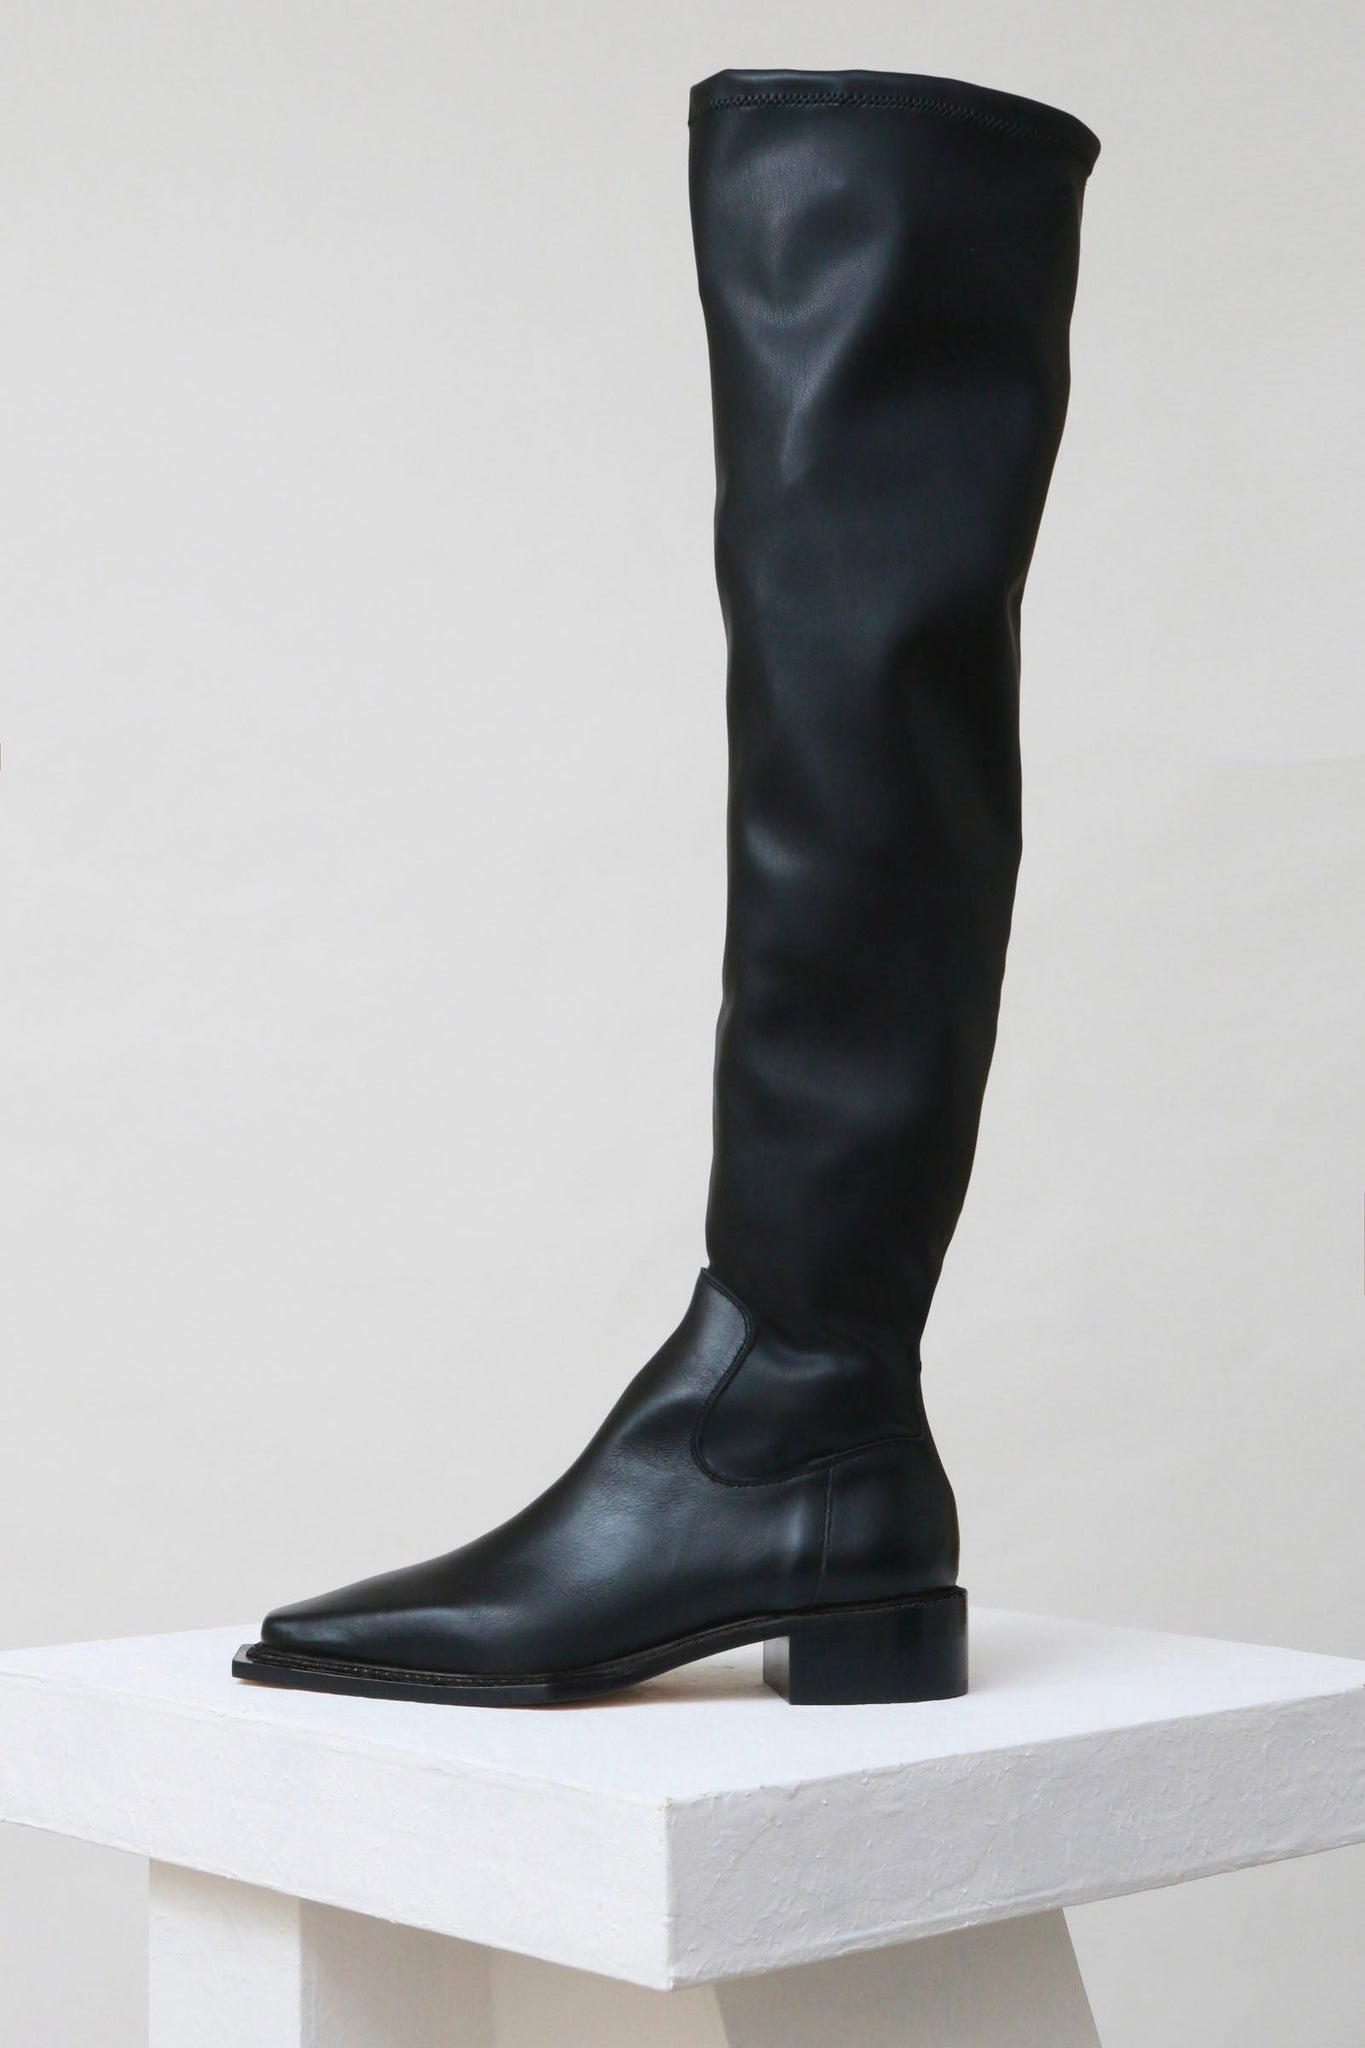 Souliers Martinez Shoes ARAVACA - Black Stretch Leather Thigh-High Boots 